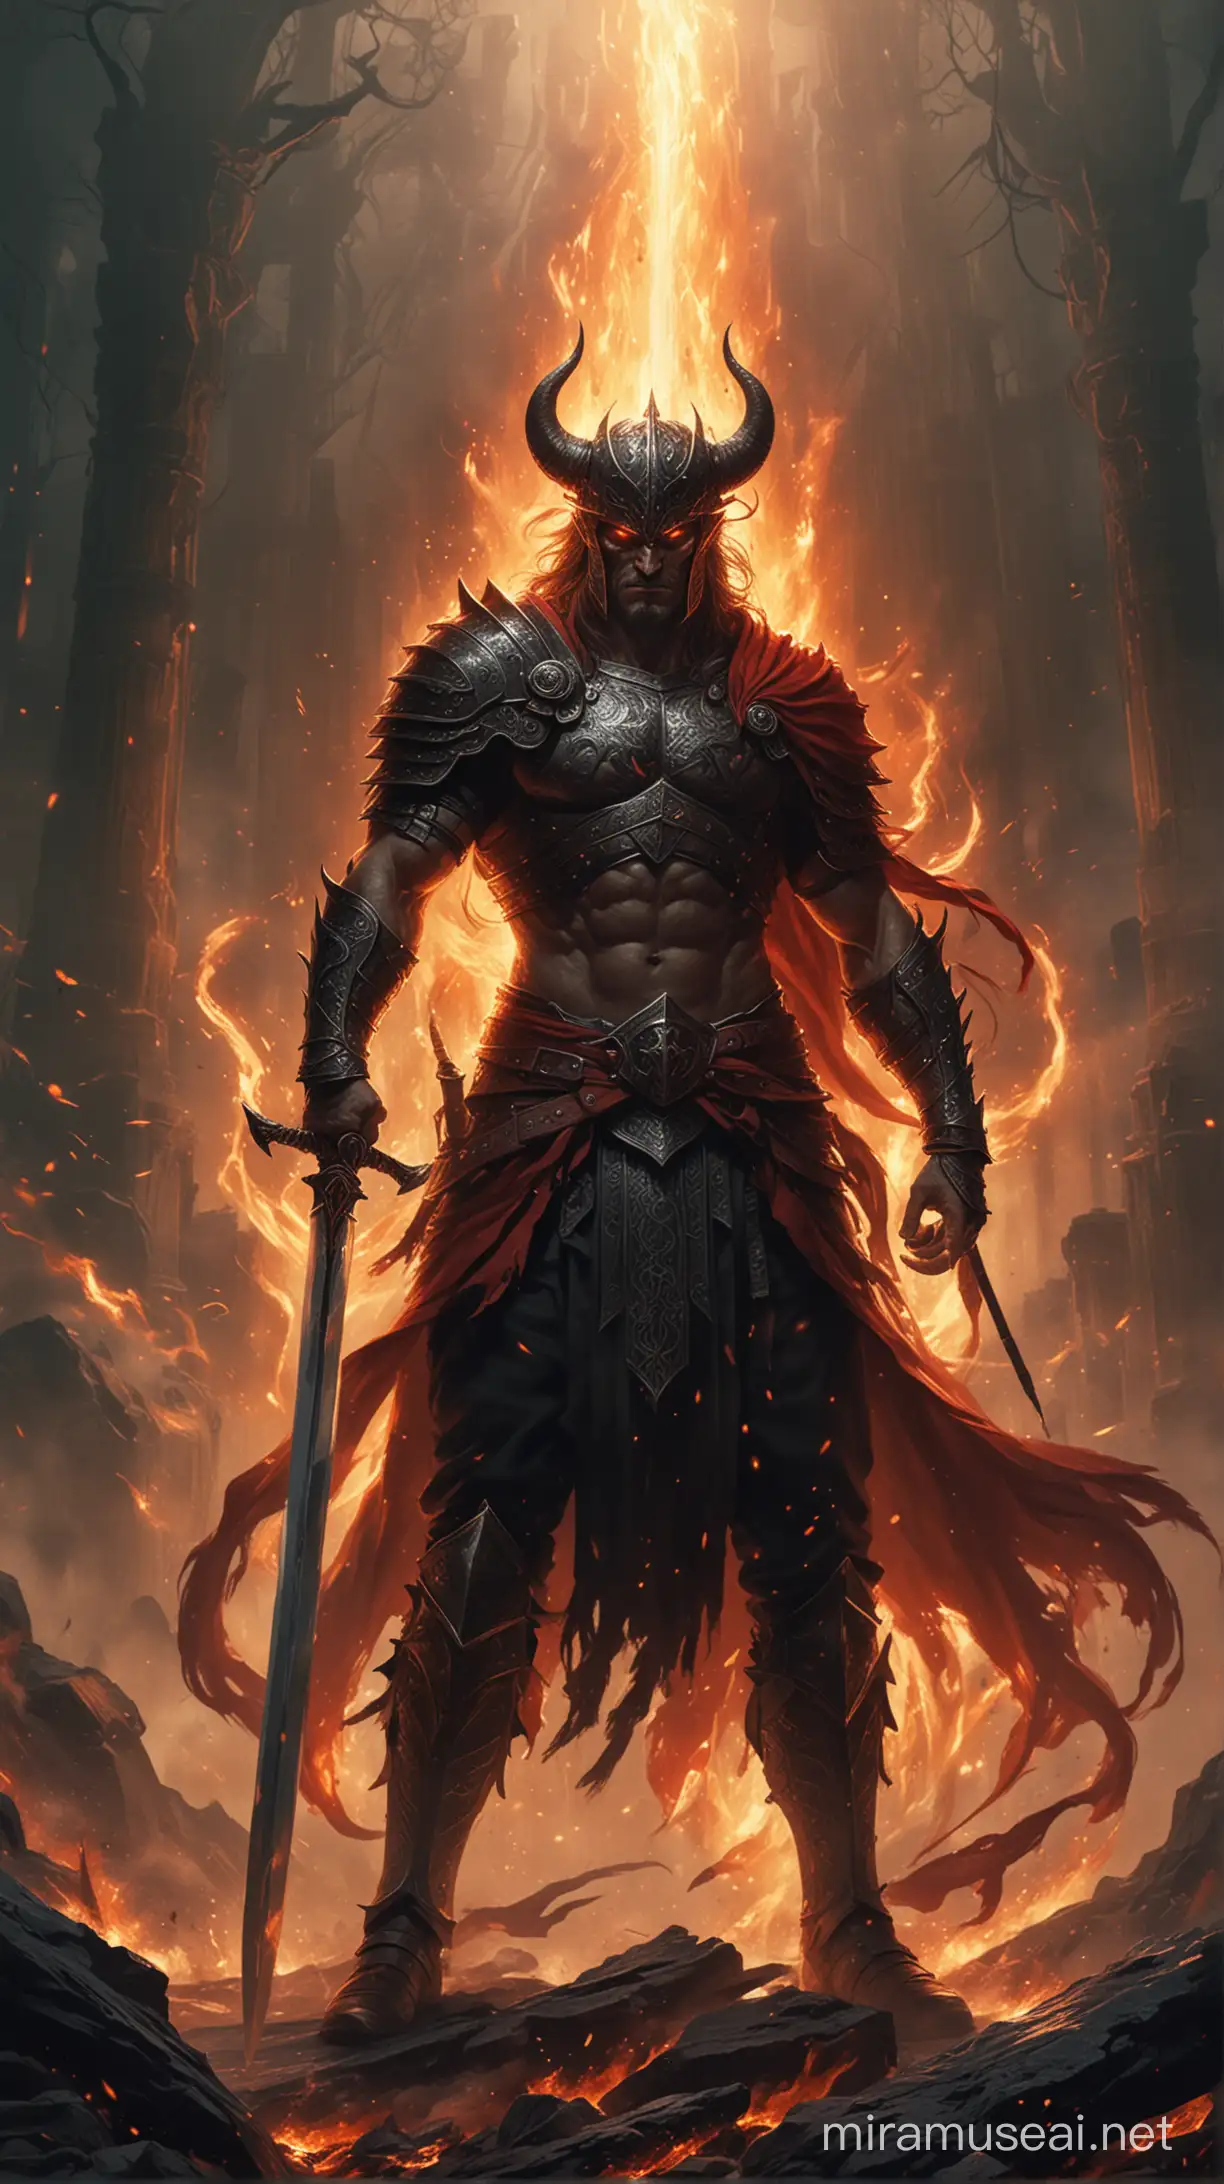 An illustration depicting a warrior's defiant stance against the Devil, with fiery determination in his eyes and a sword in hand: A powerful warrior is depicted, with eyes blazing with determination, staring down the Devil. With a sword held high in his right hand and his left hand ready for defense, he challenges the darkness with unwavering resolve. In the background, there is an aura of swirling darkness, but the warrior confronts it with unwavering determination.

